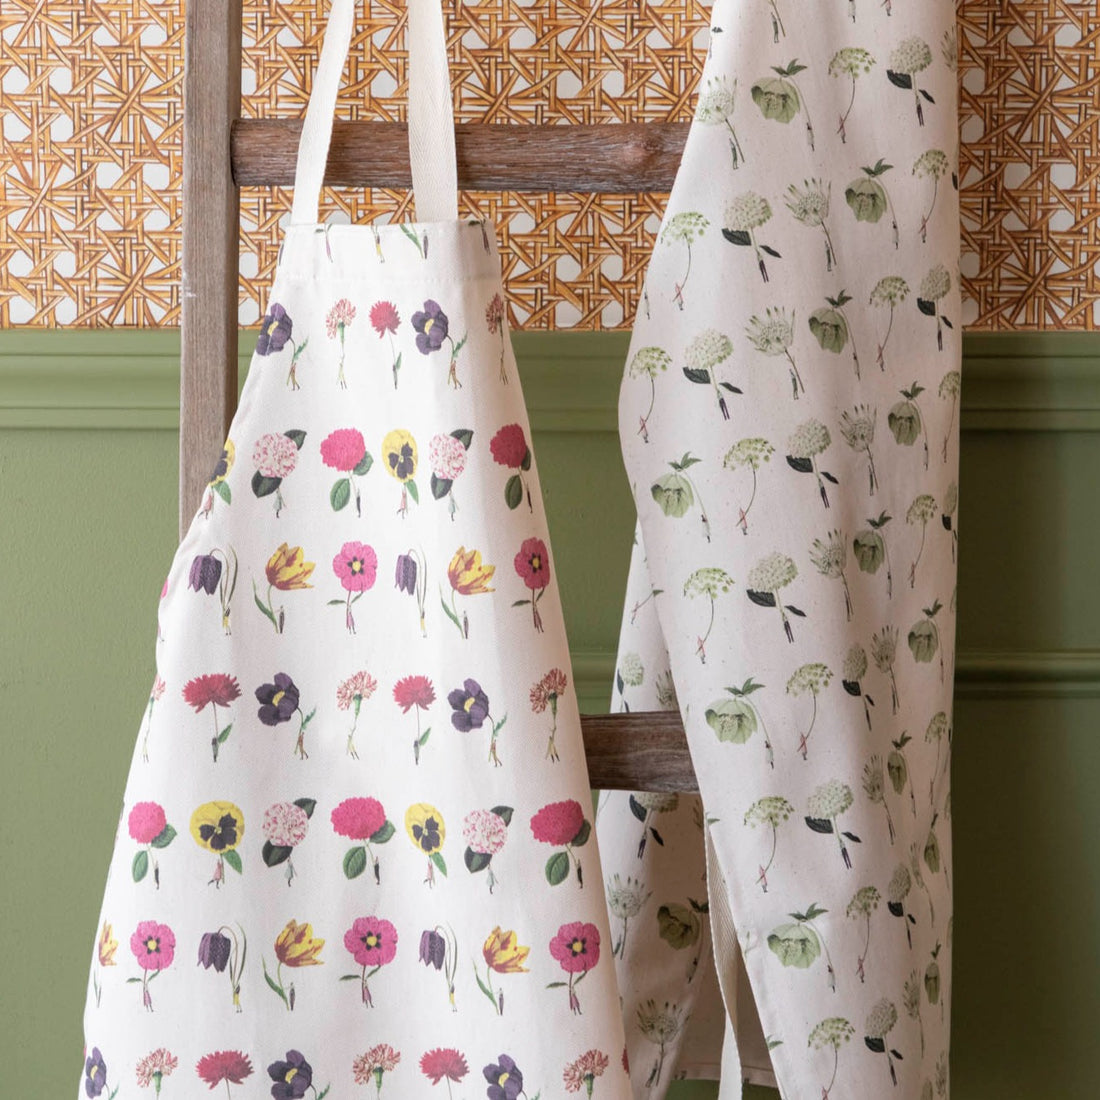 Two Laura Stoddart Aprons by Hester &amp; Cook hanging on a wooden ladder against a wall with patterned wallpaper above wainscoting.